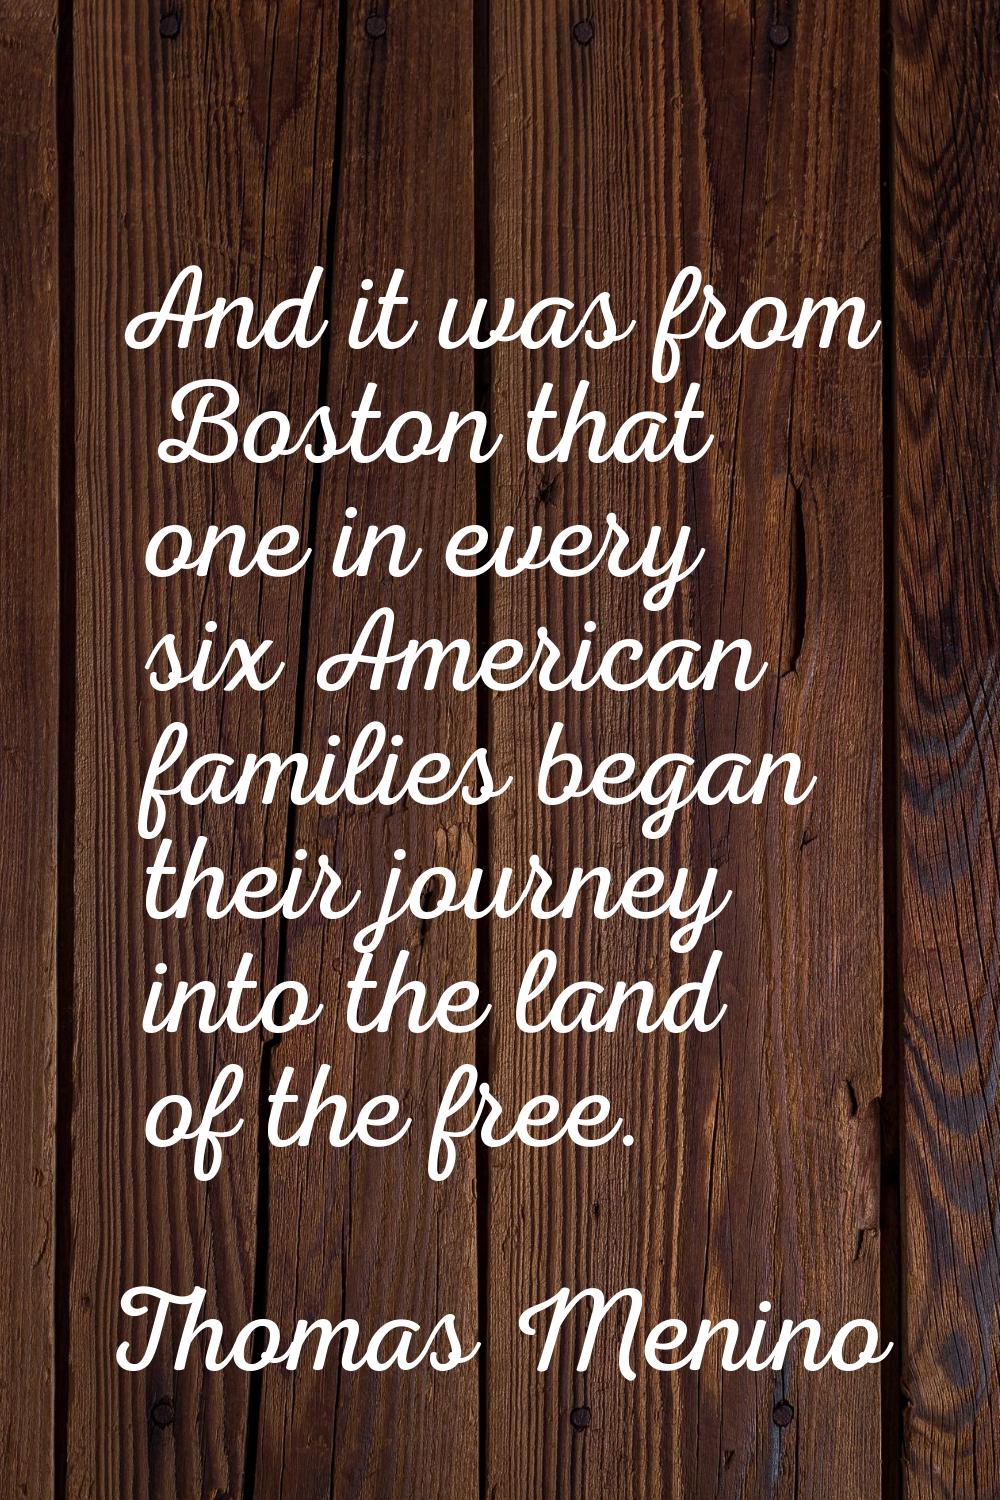 And it was from Boston that one in every six American families began their journey into the land of